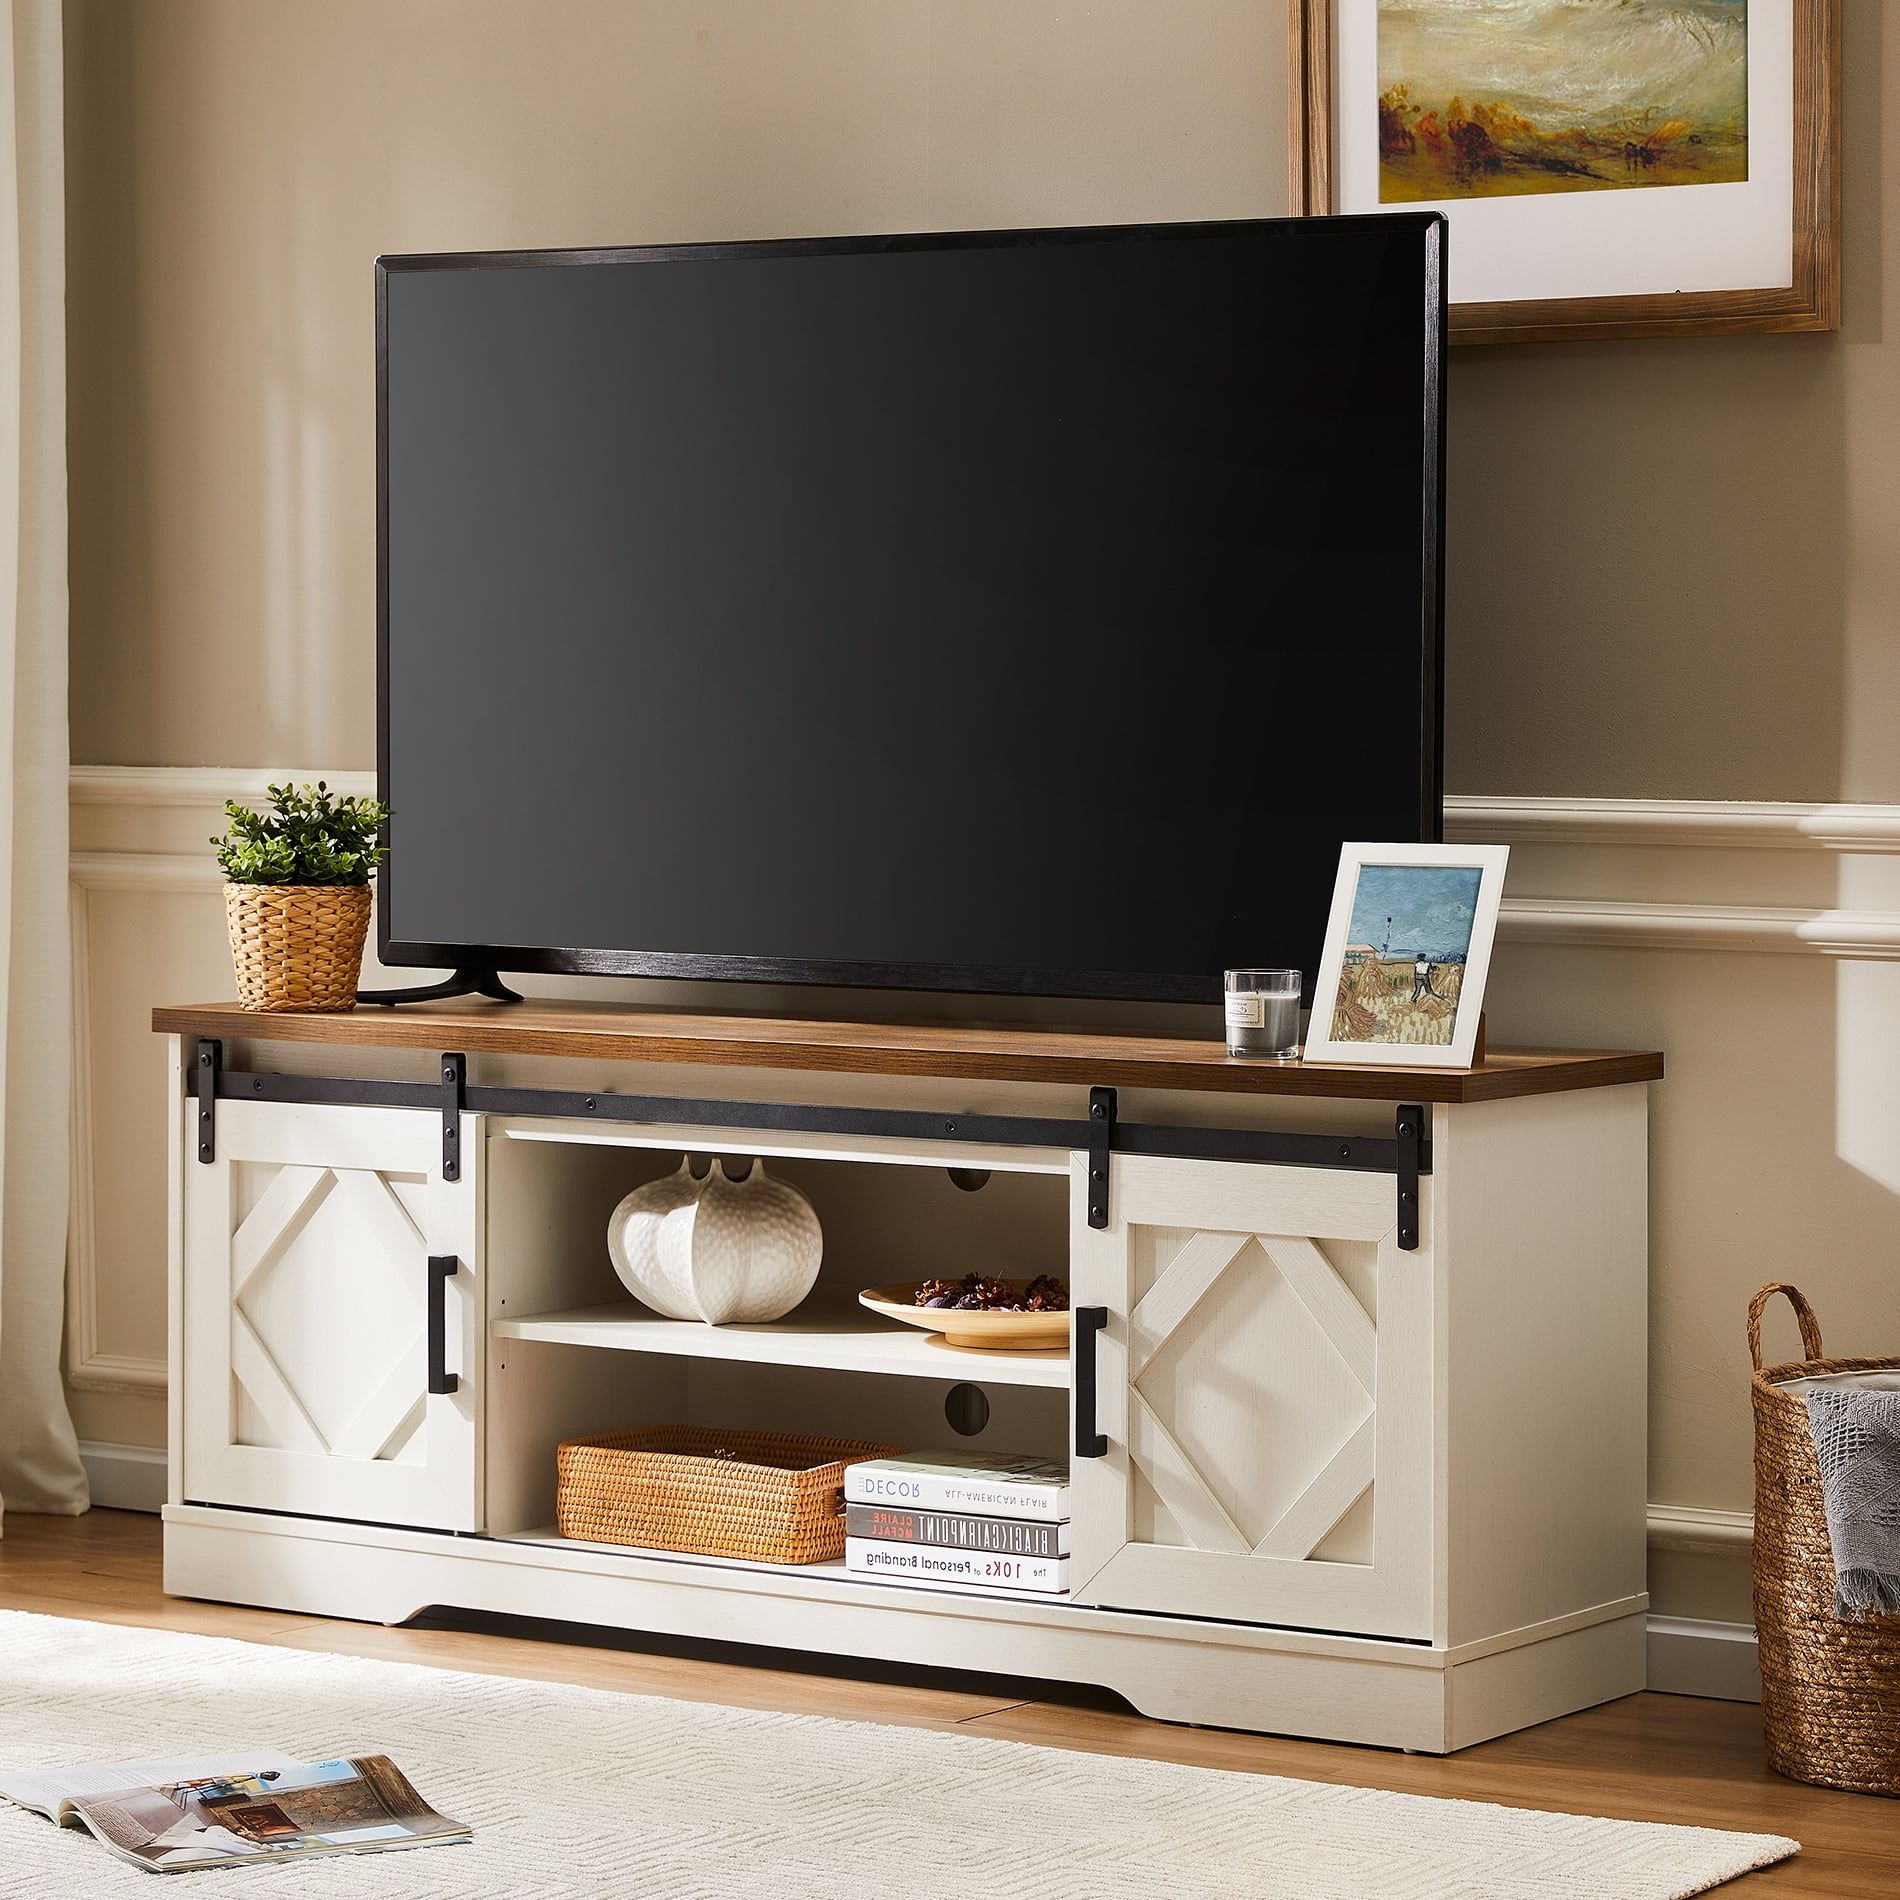 Featured Photo of 15 Best Ideas Modern Farmhouse Rustic Tv Stands